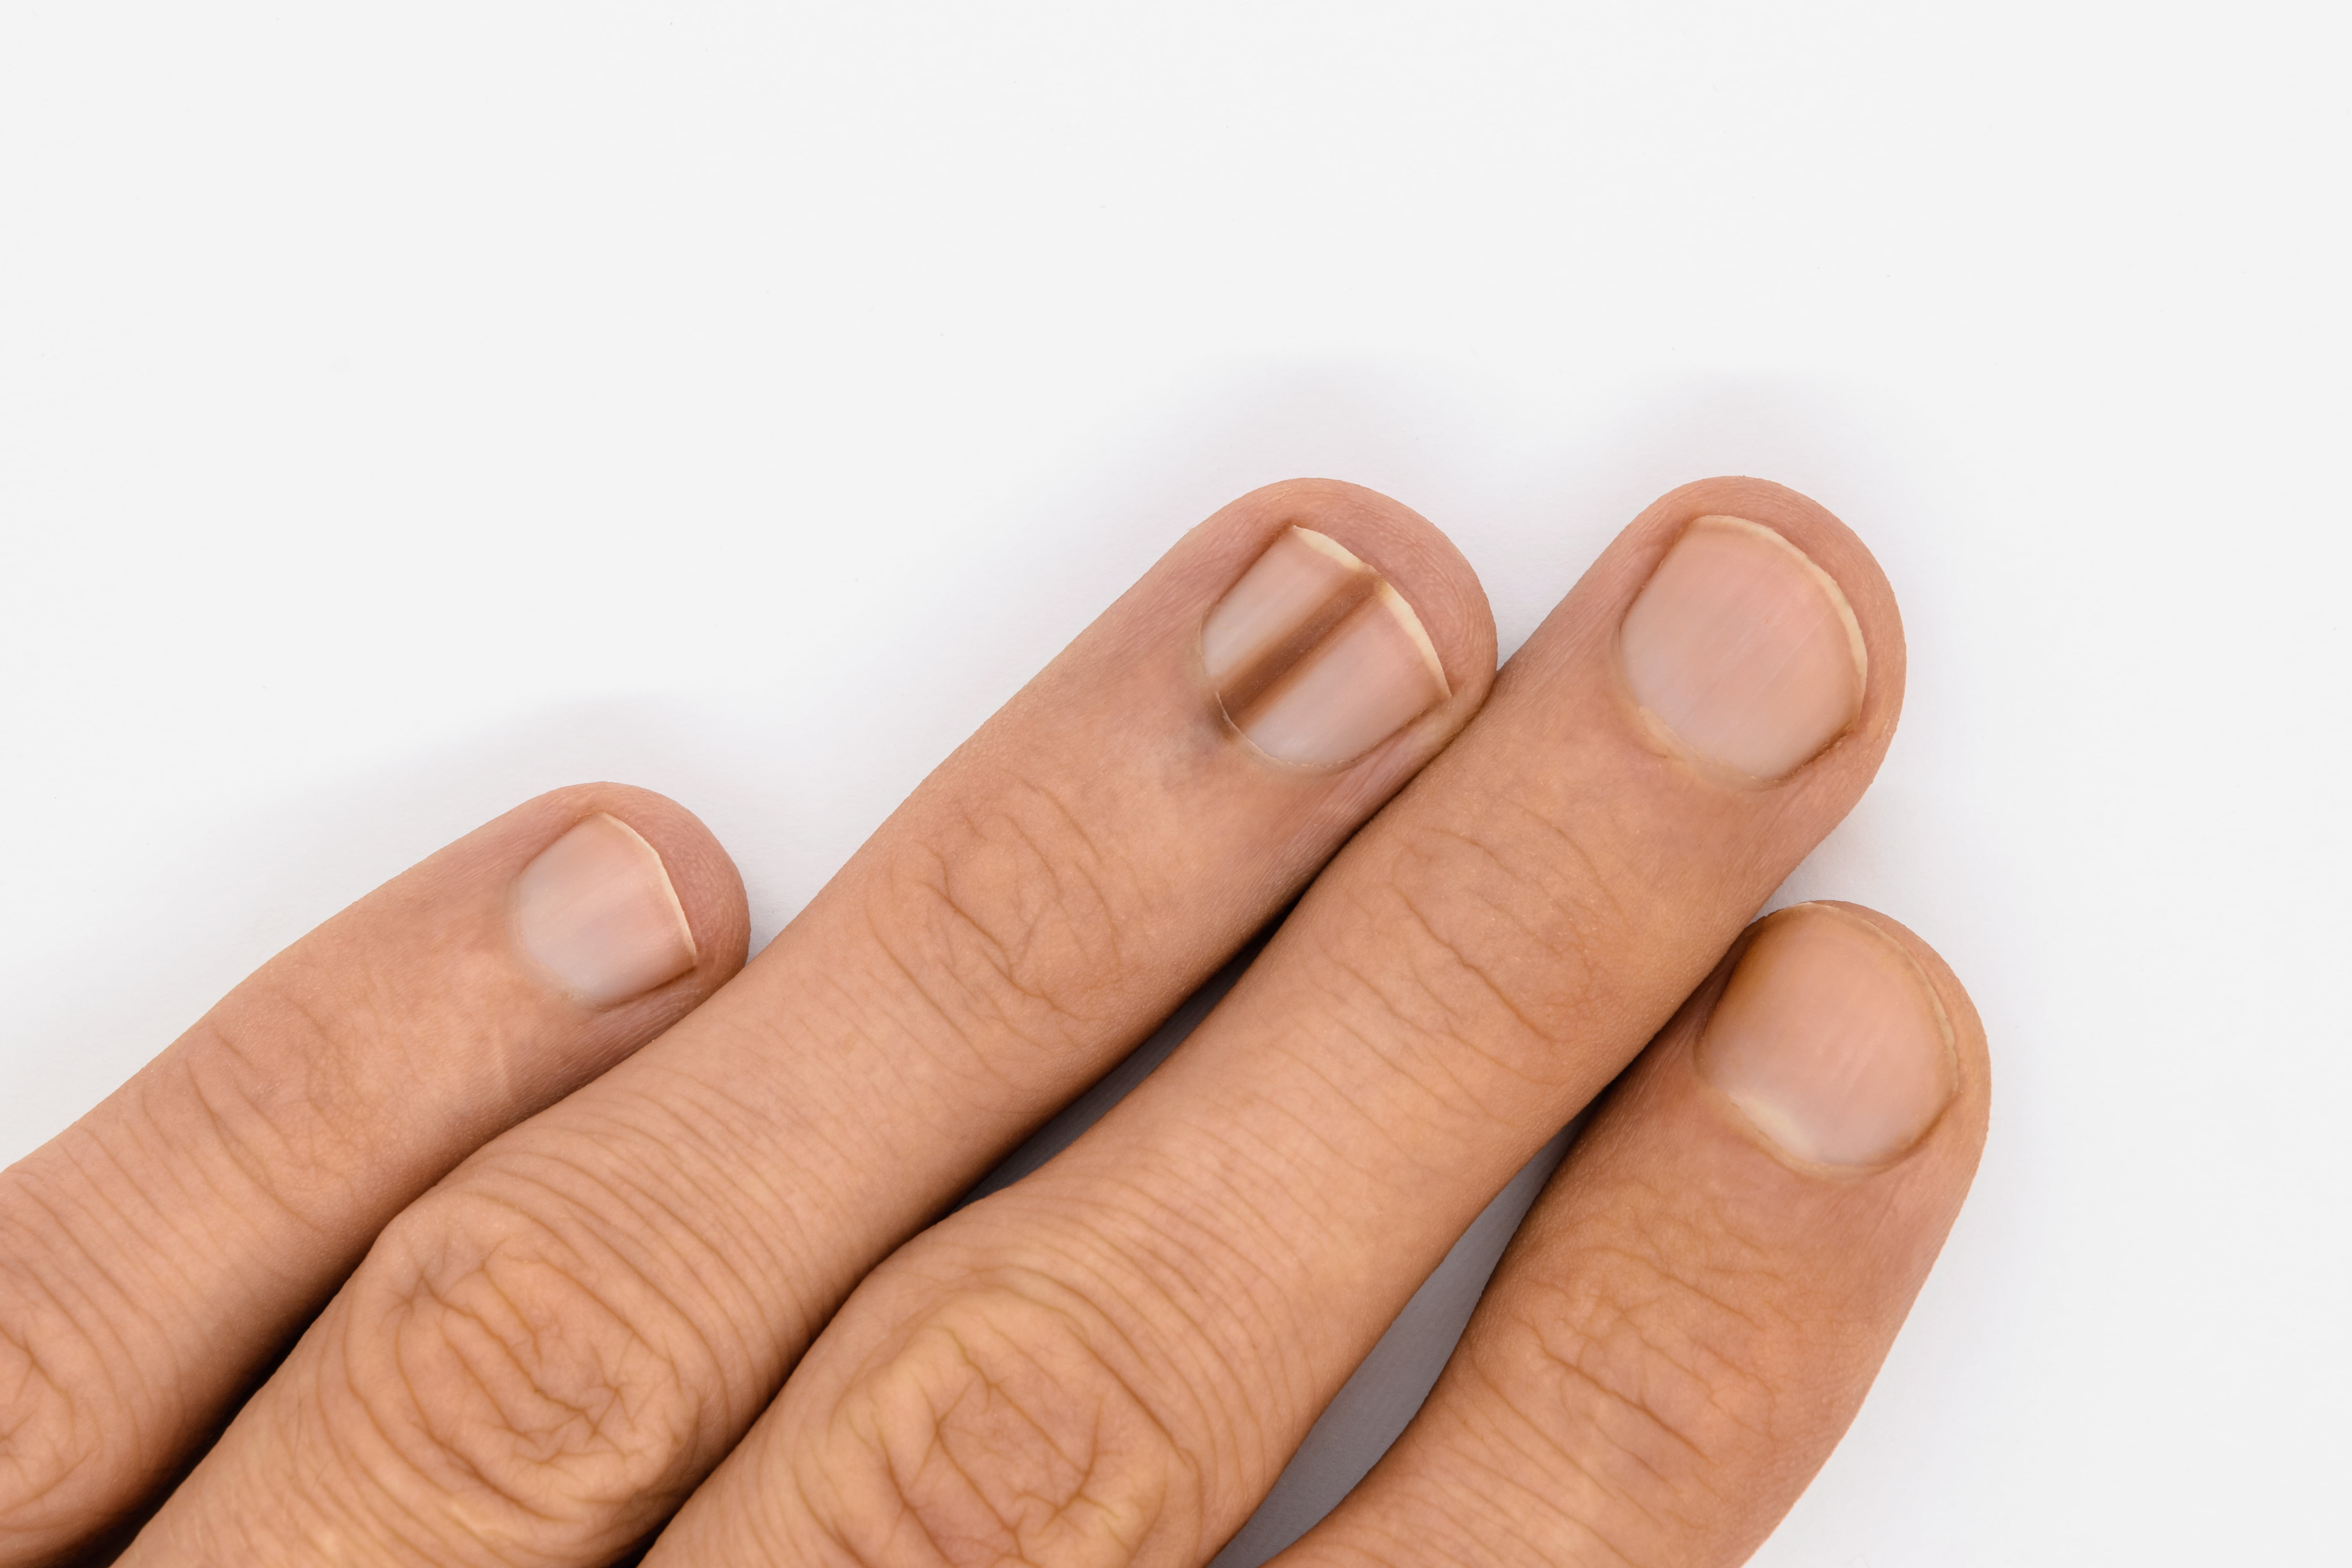 Thick nails, Nail problems, What We Treat